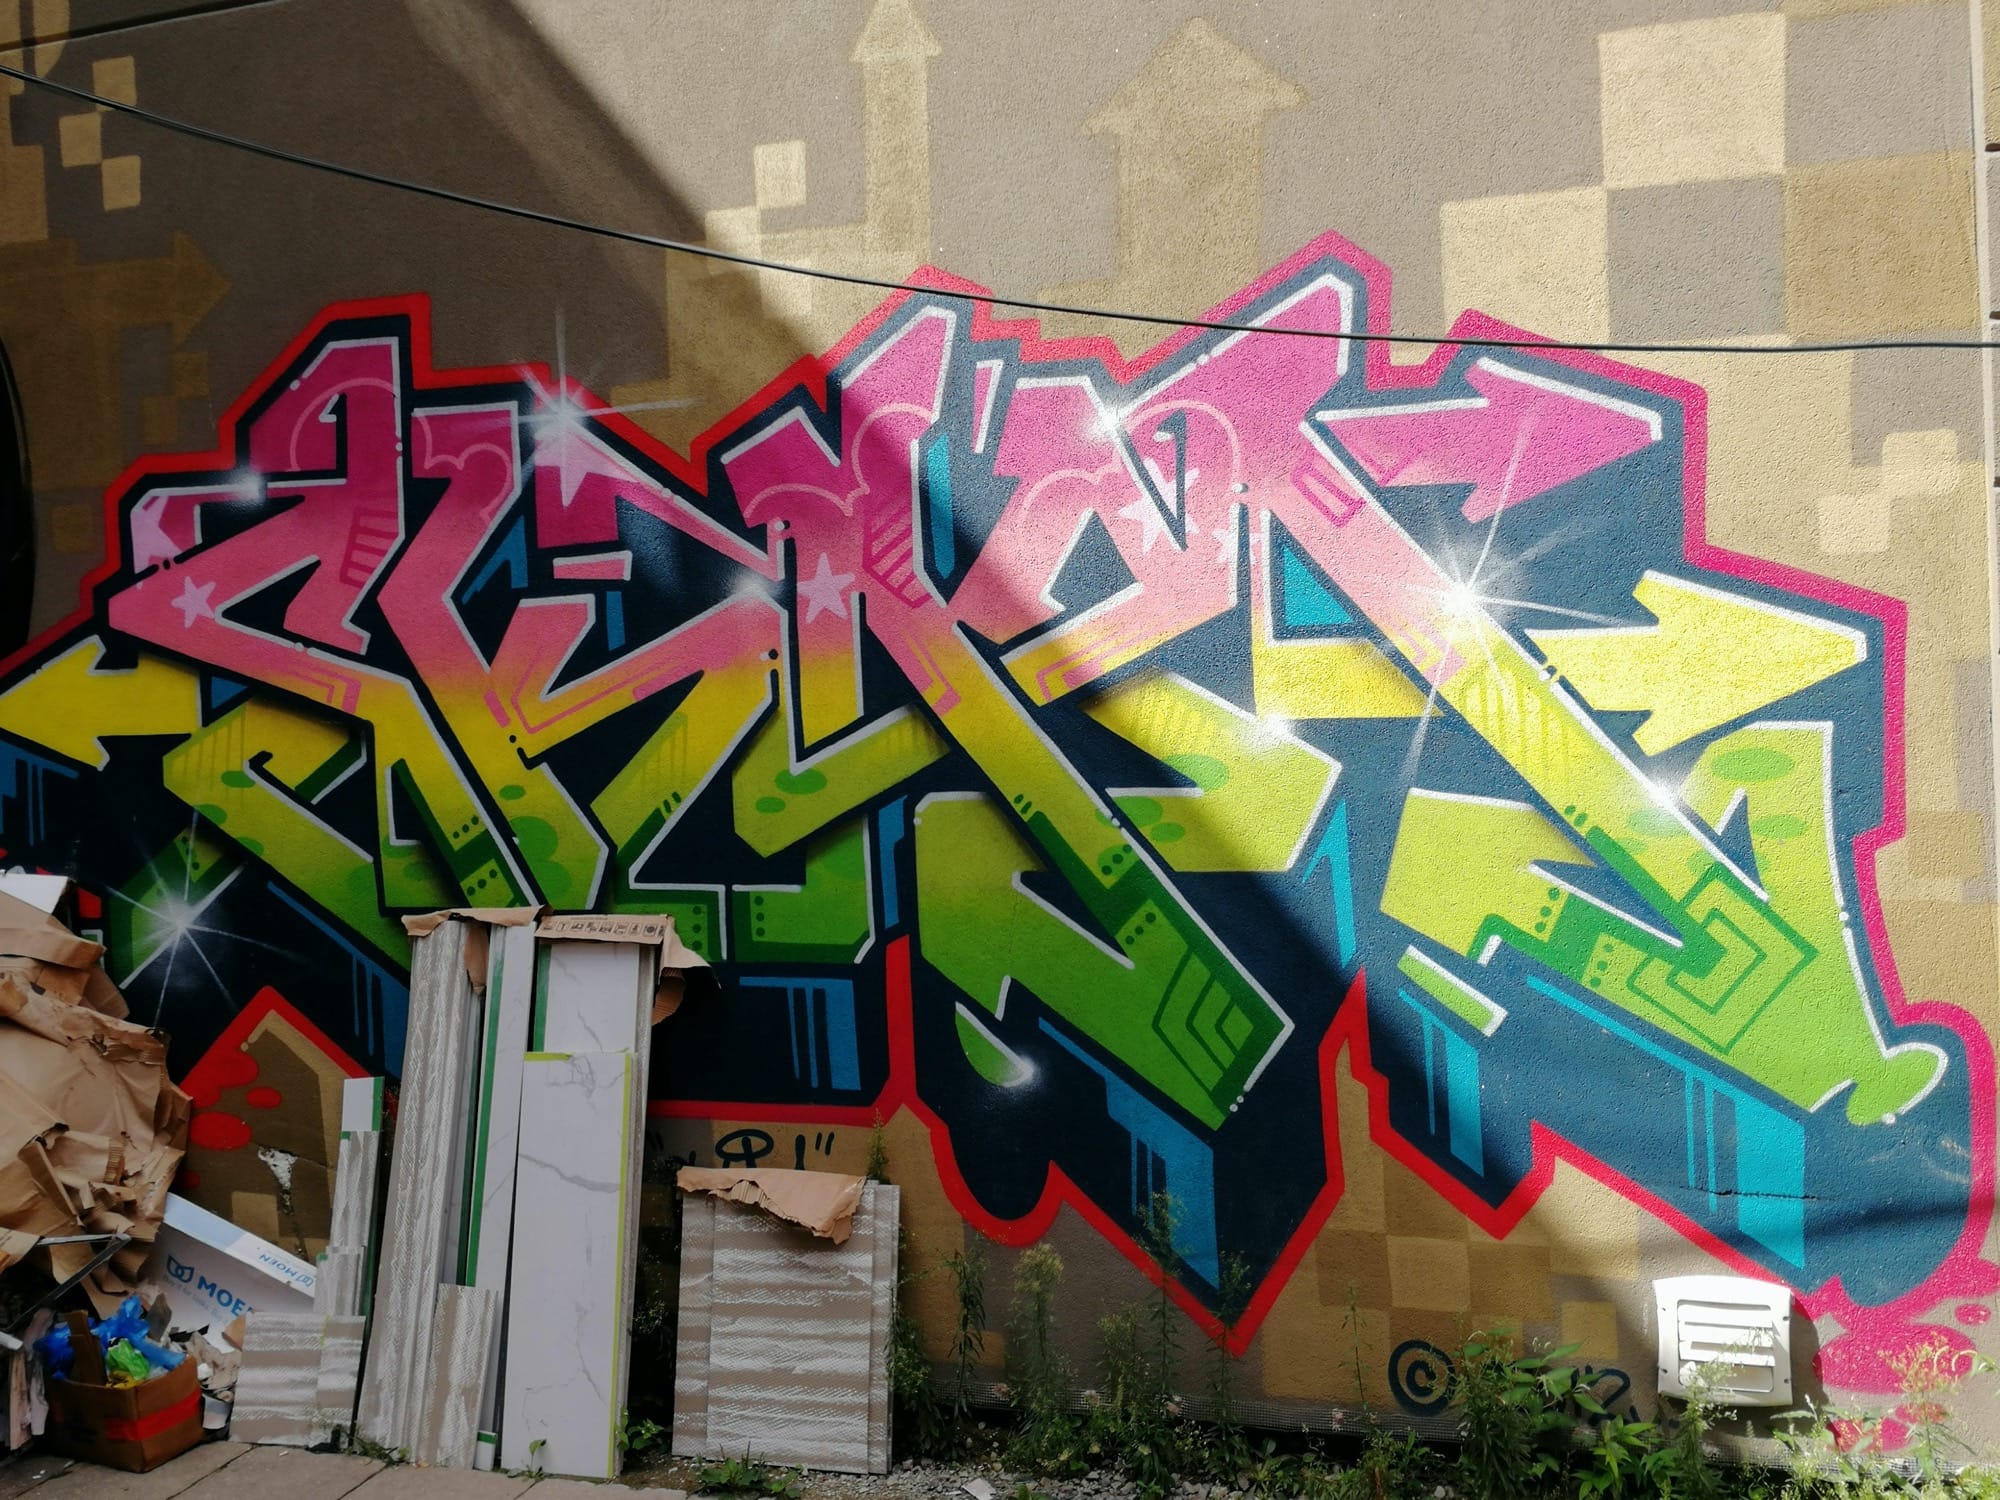 Graffiti 2562  captured by Rabot in Toronto Canada